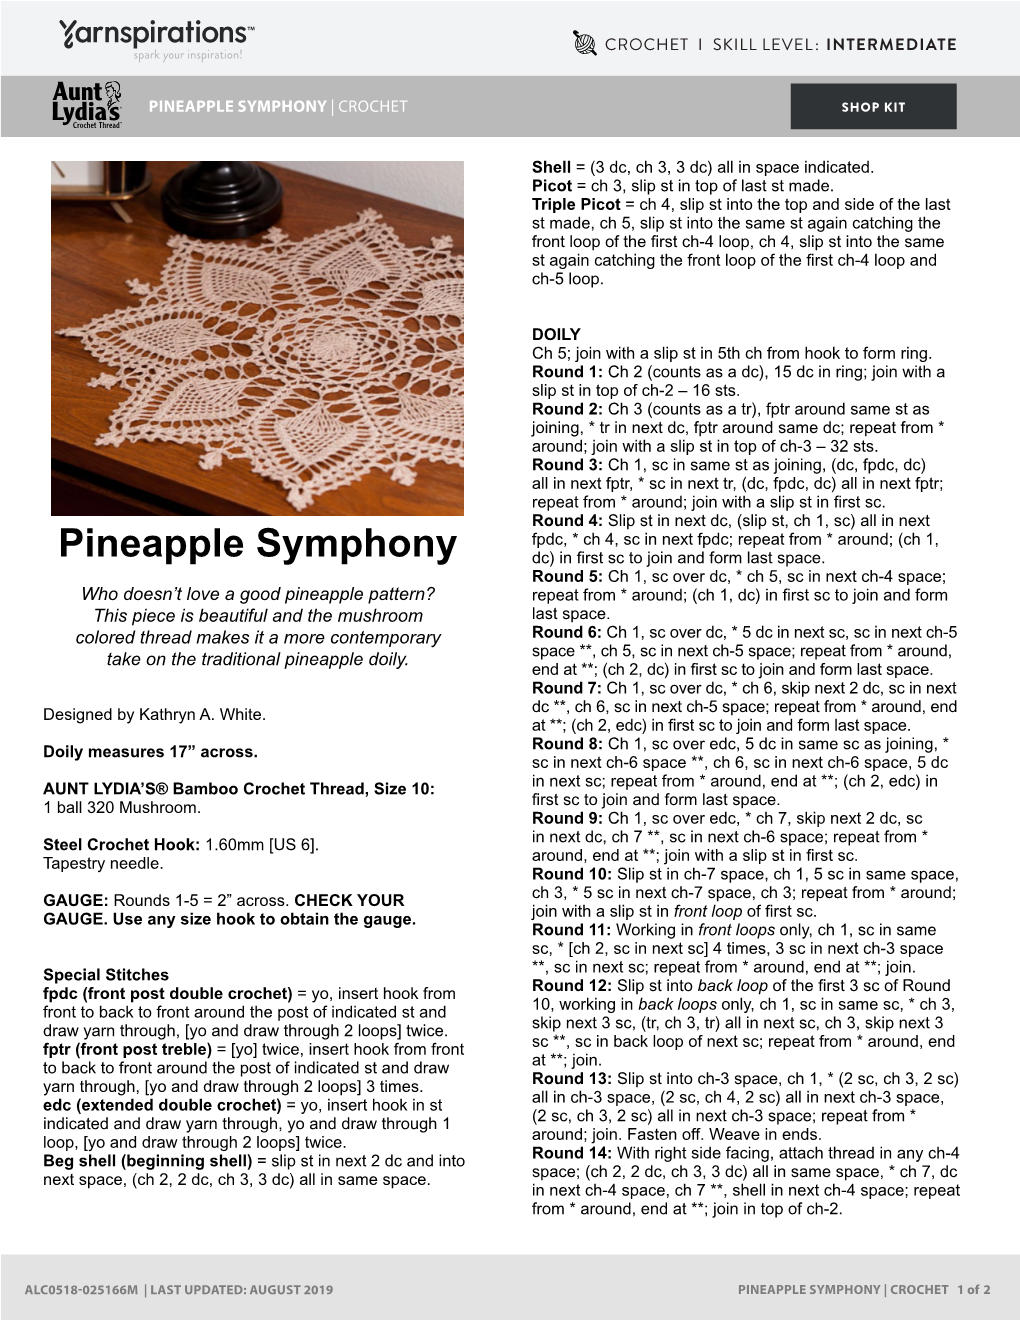 Download Aunt Lydia's Pineapple Symphony Free Pattern